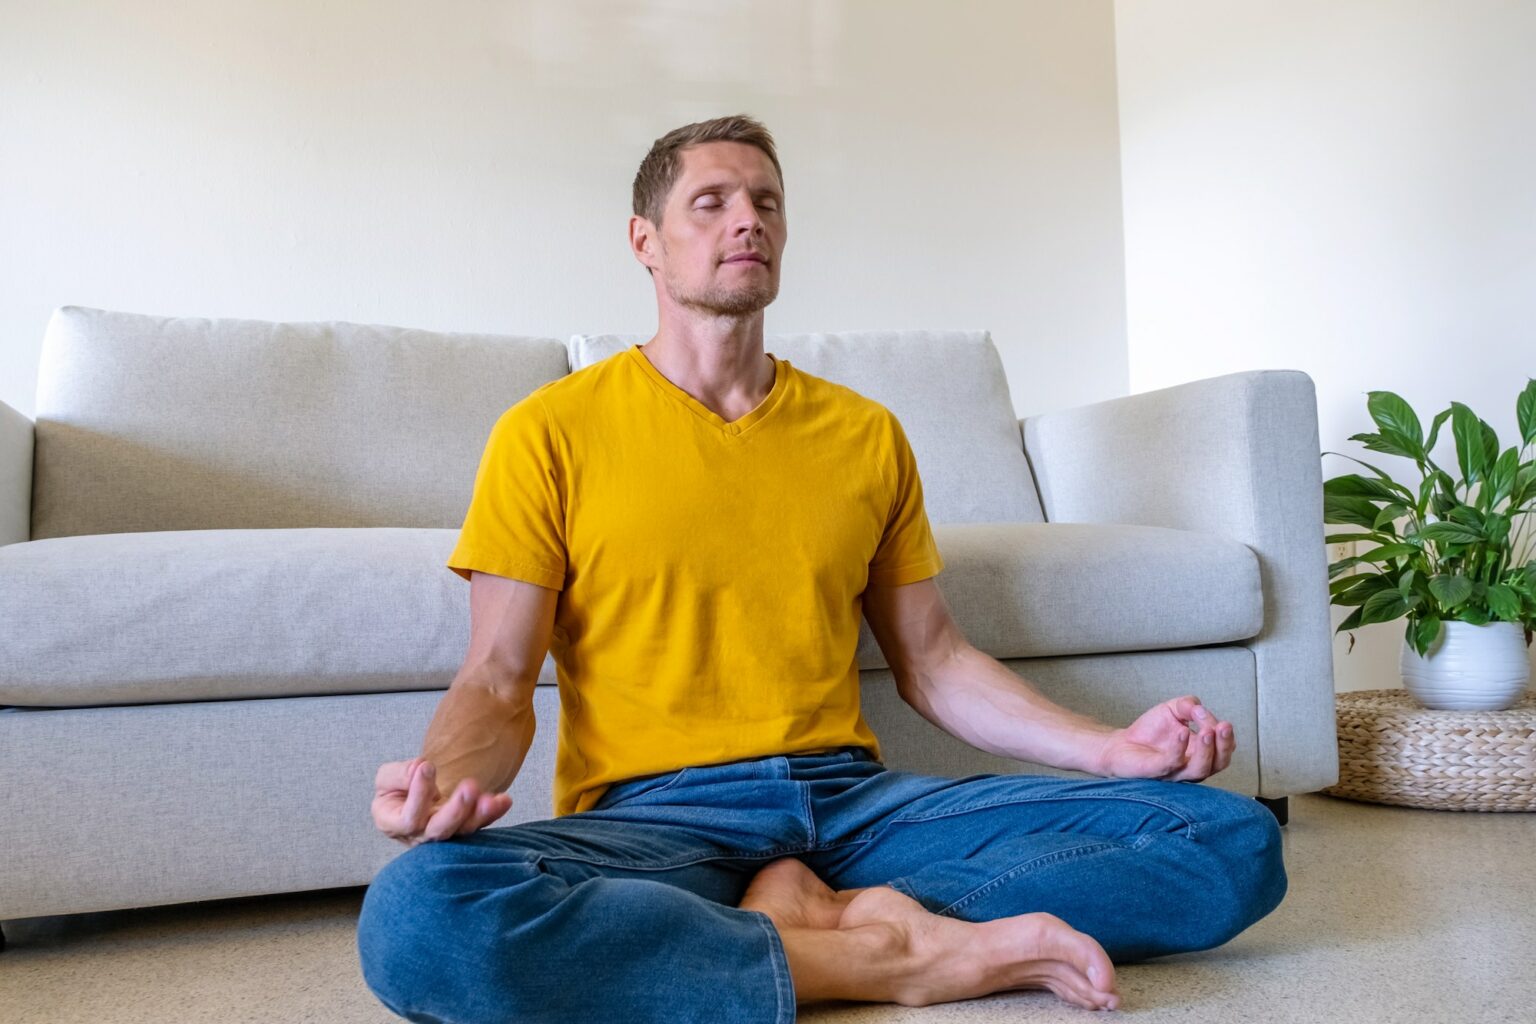 Meditation and mental health content